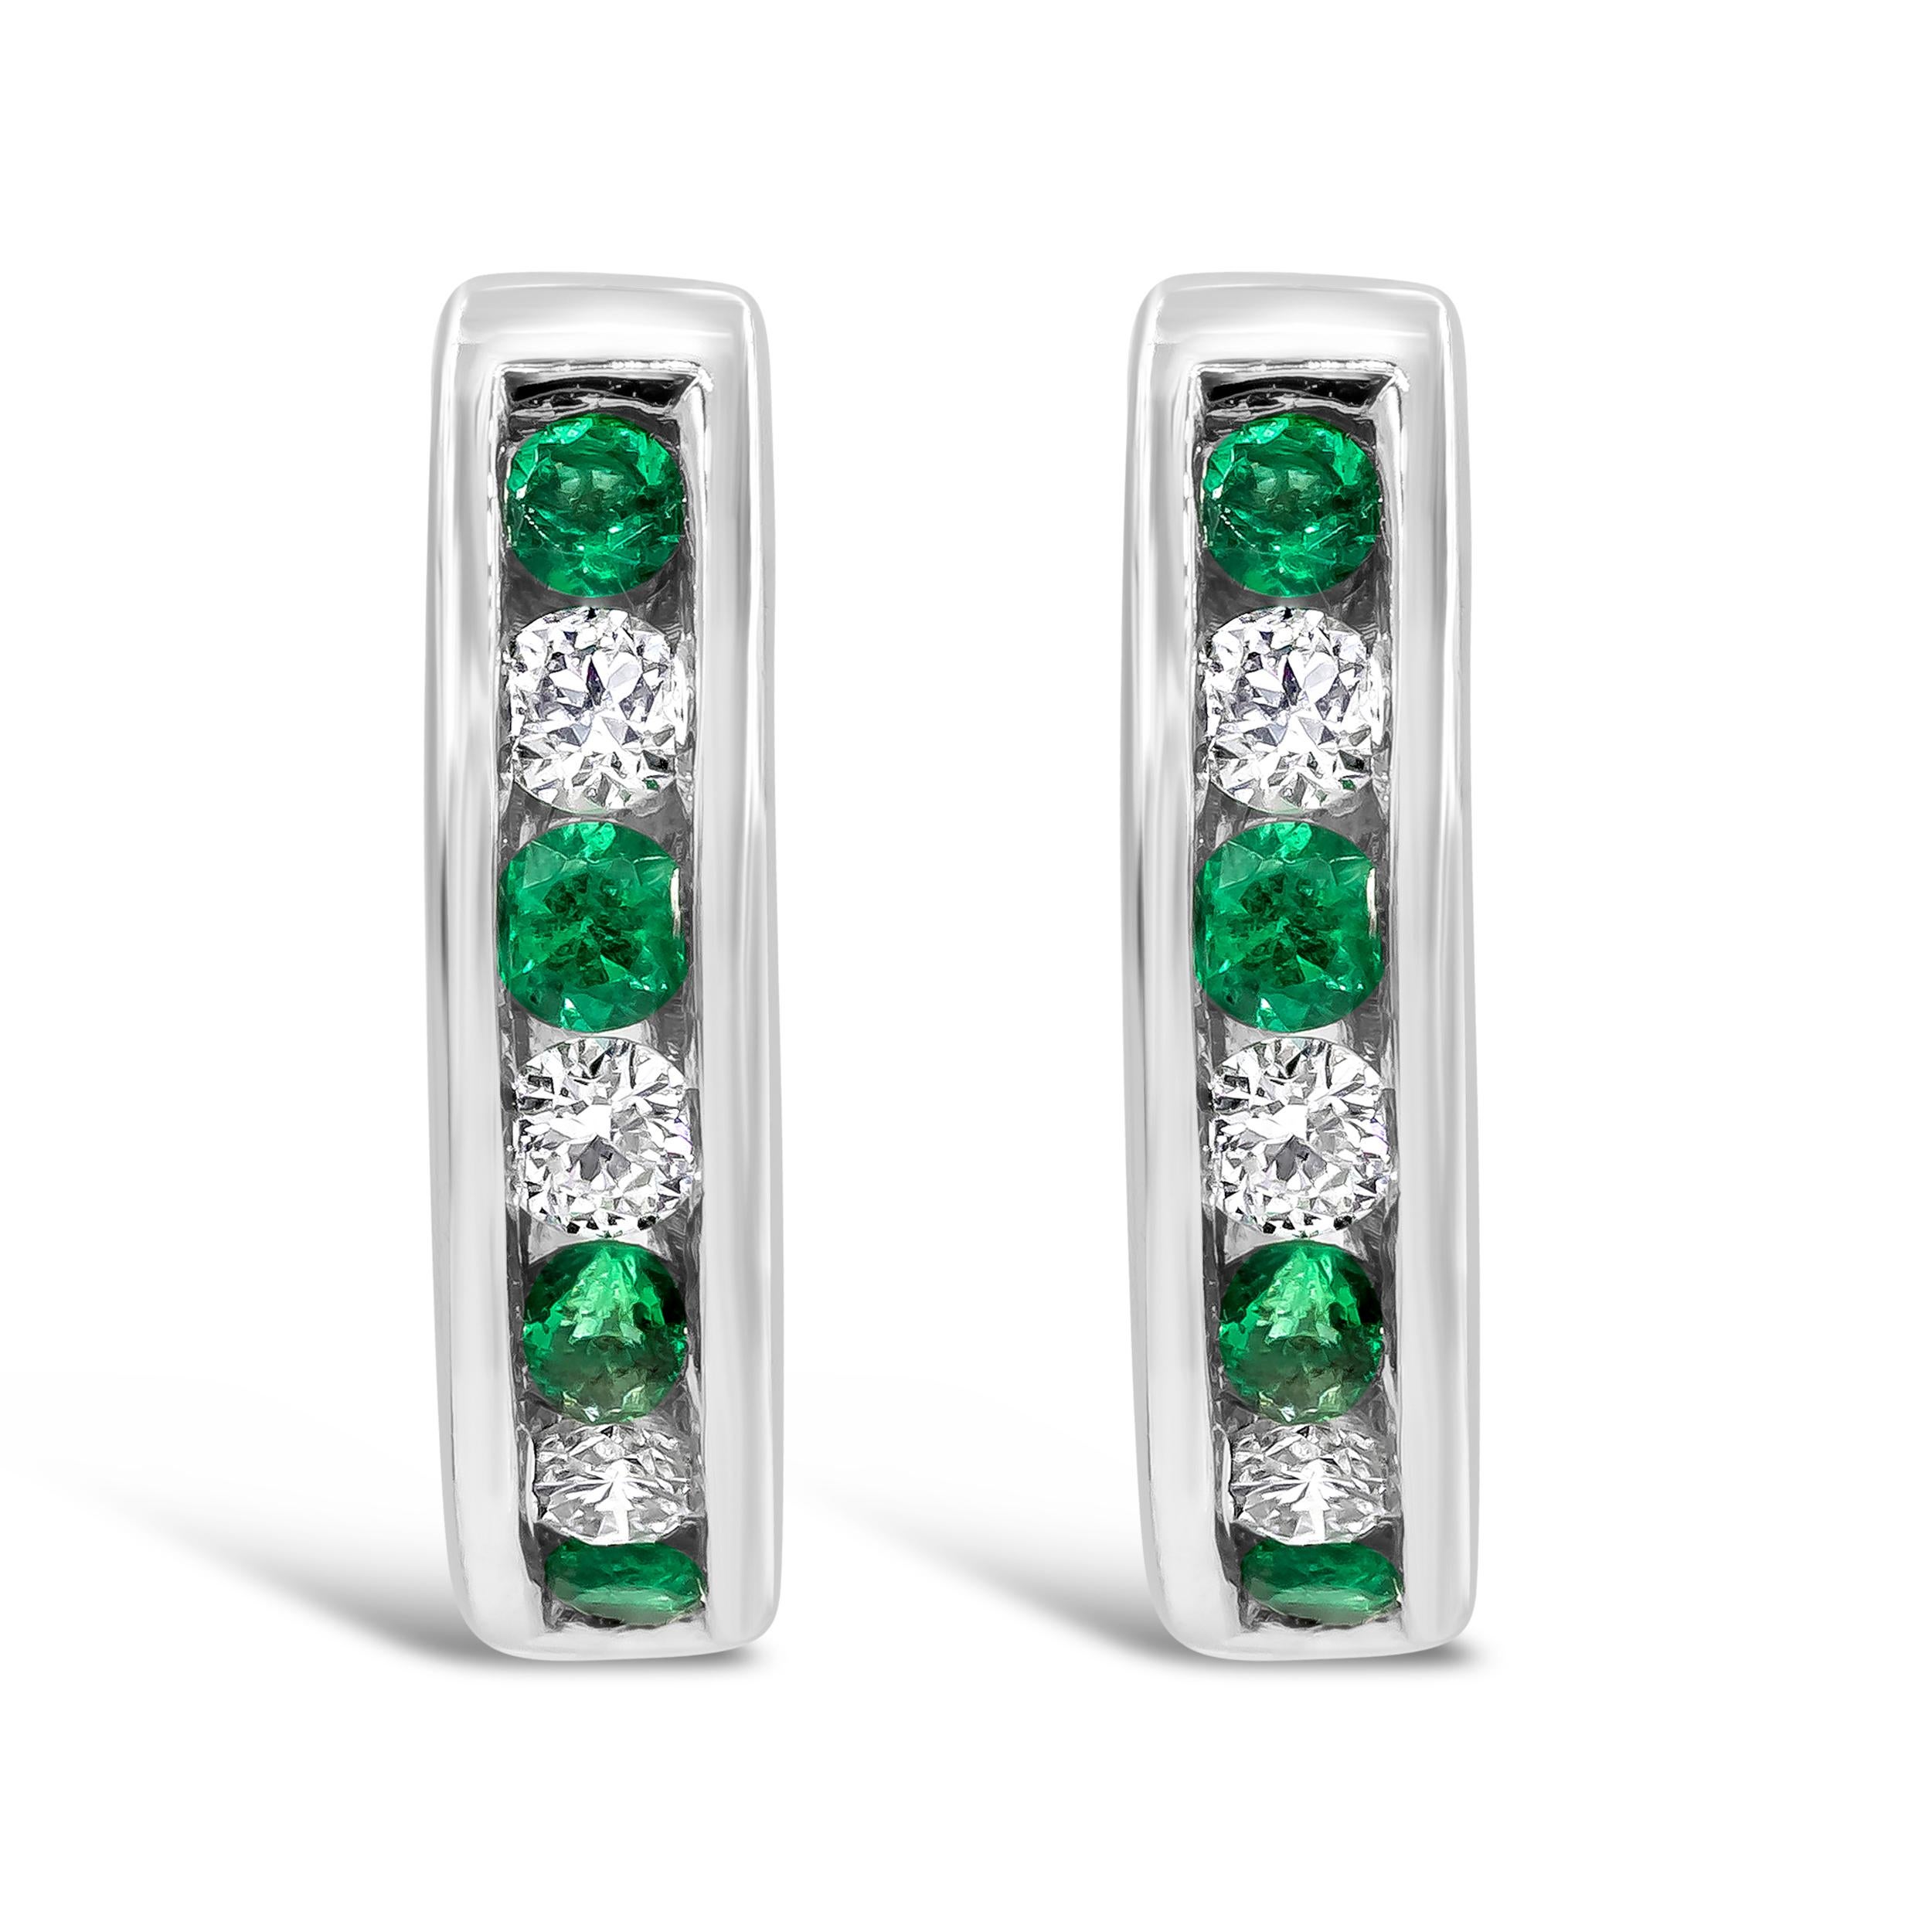 A simple pair of hoop earrings showcasing round green emeralds that elegantly alternate with round brilliant diamonds. Channel set in 18 karat white gold. Emeralds weigh 0.13 carats total; diamonds weigh 0.11 carats total.

